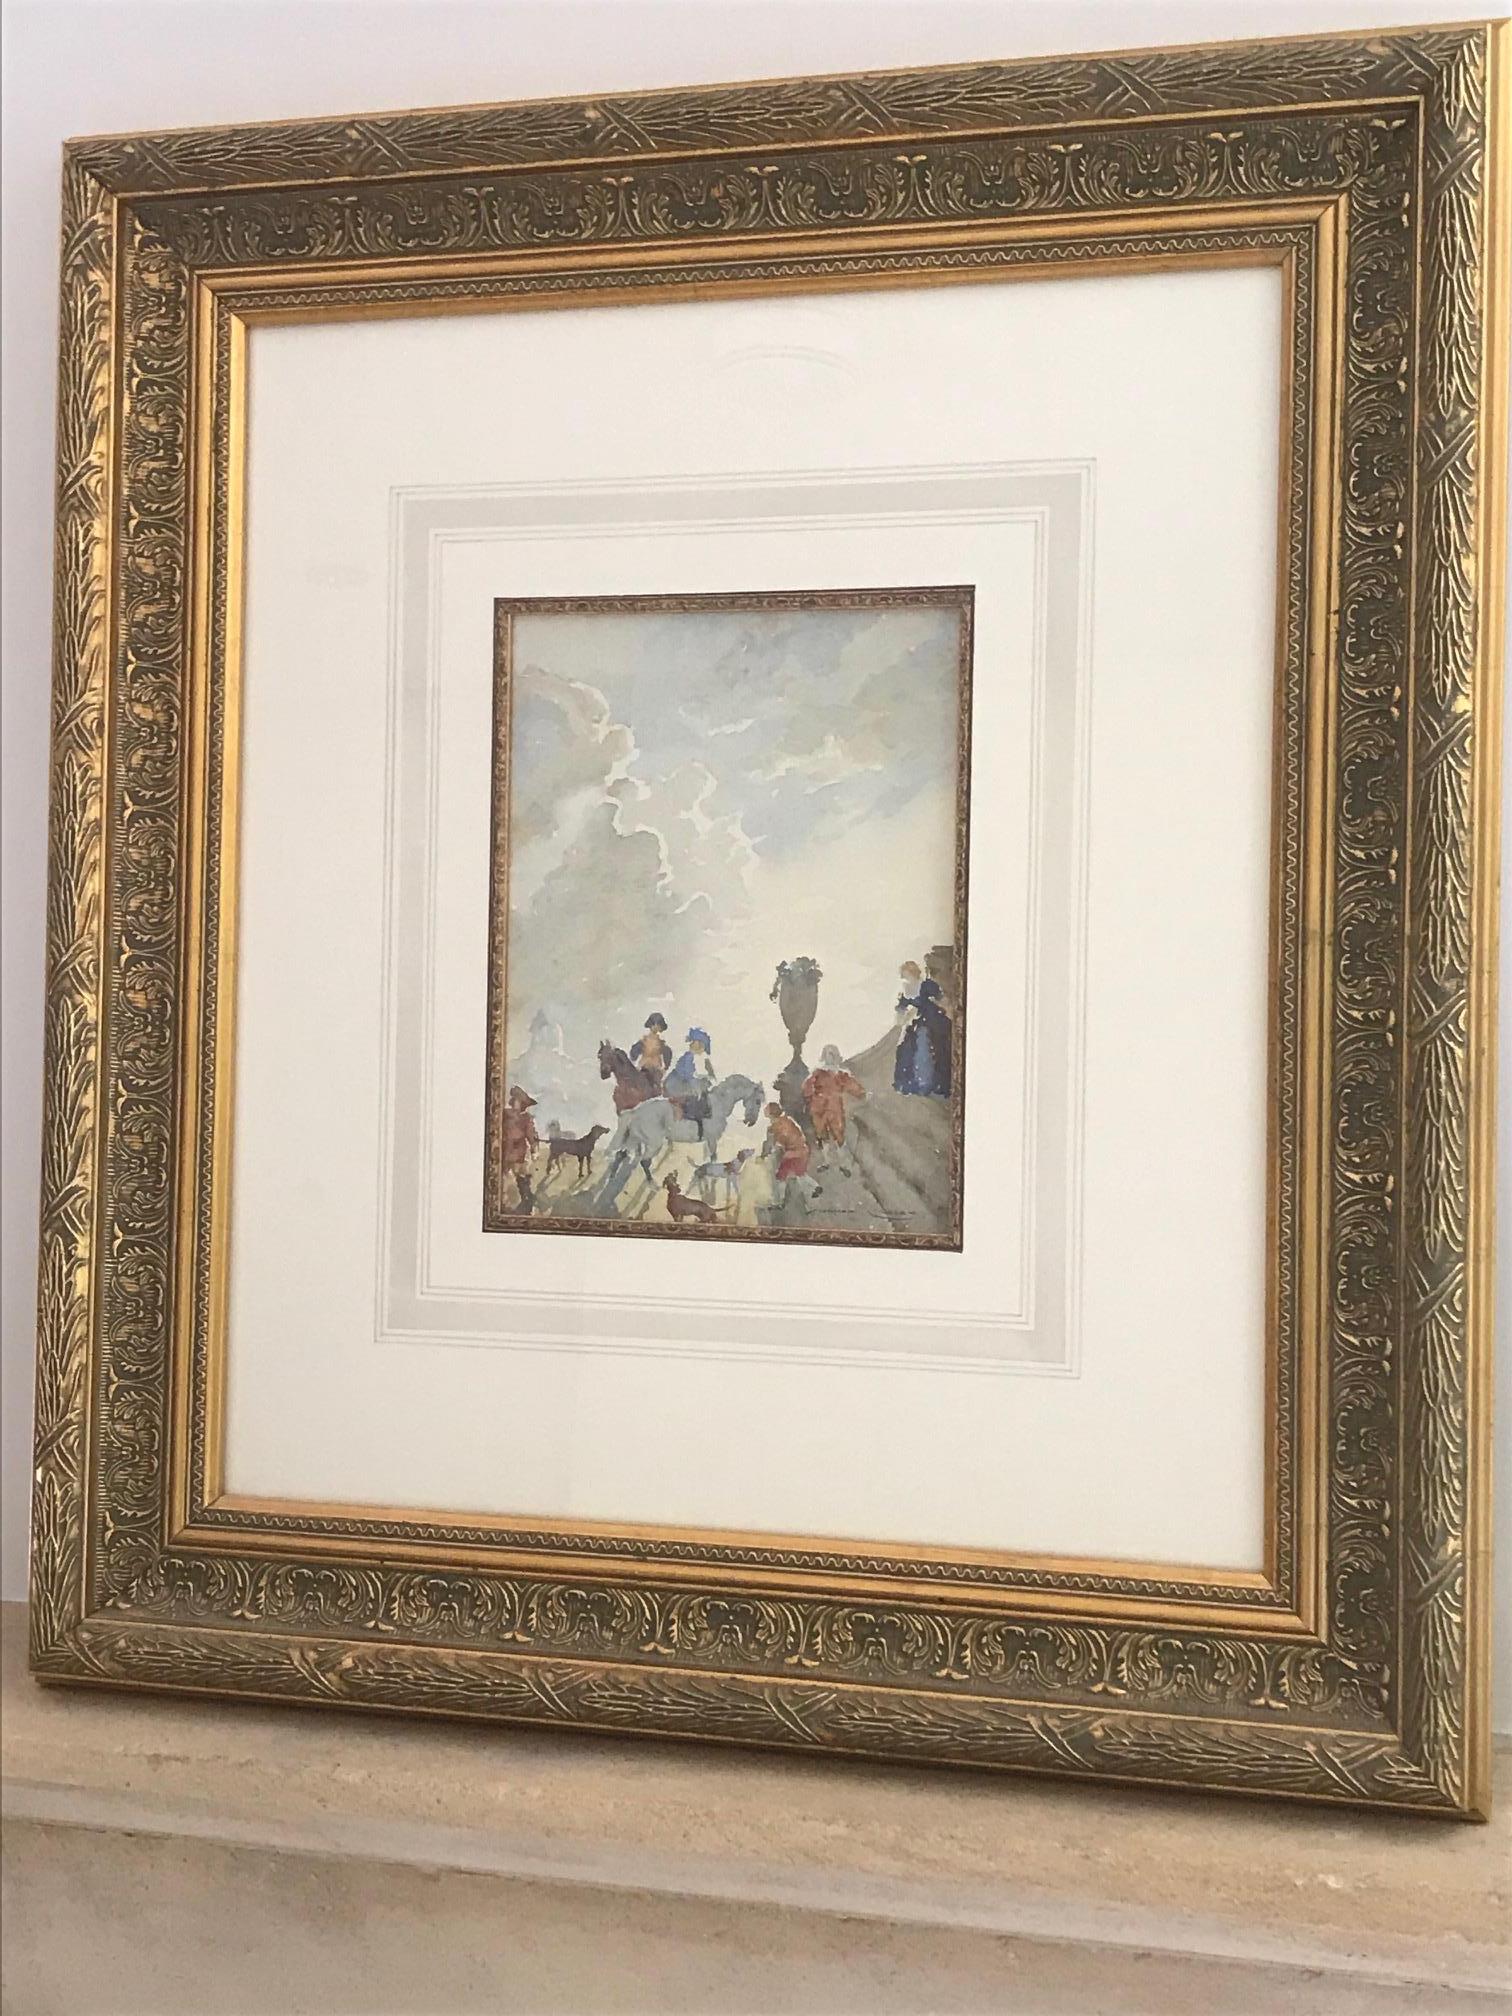 The Castle, Signed Watercolour painting by Norman Lindsey - Gray Figurative Painting by Norman Lindsay